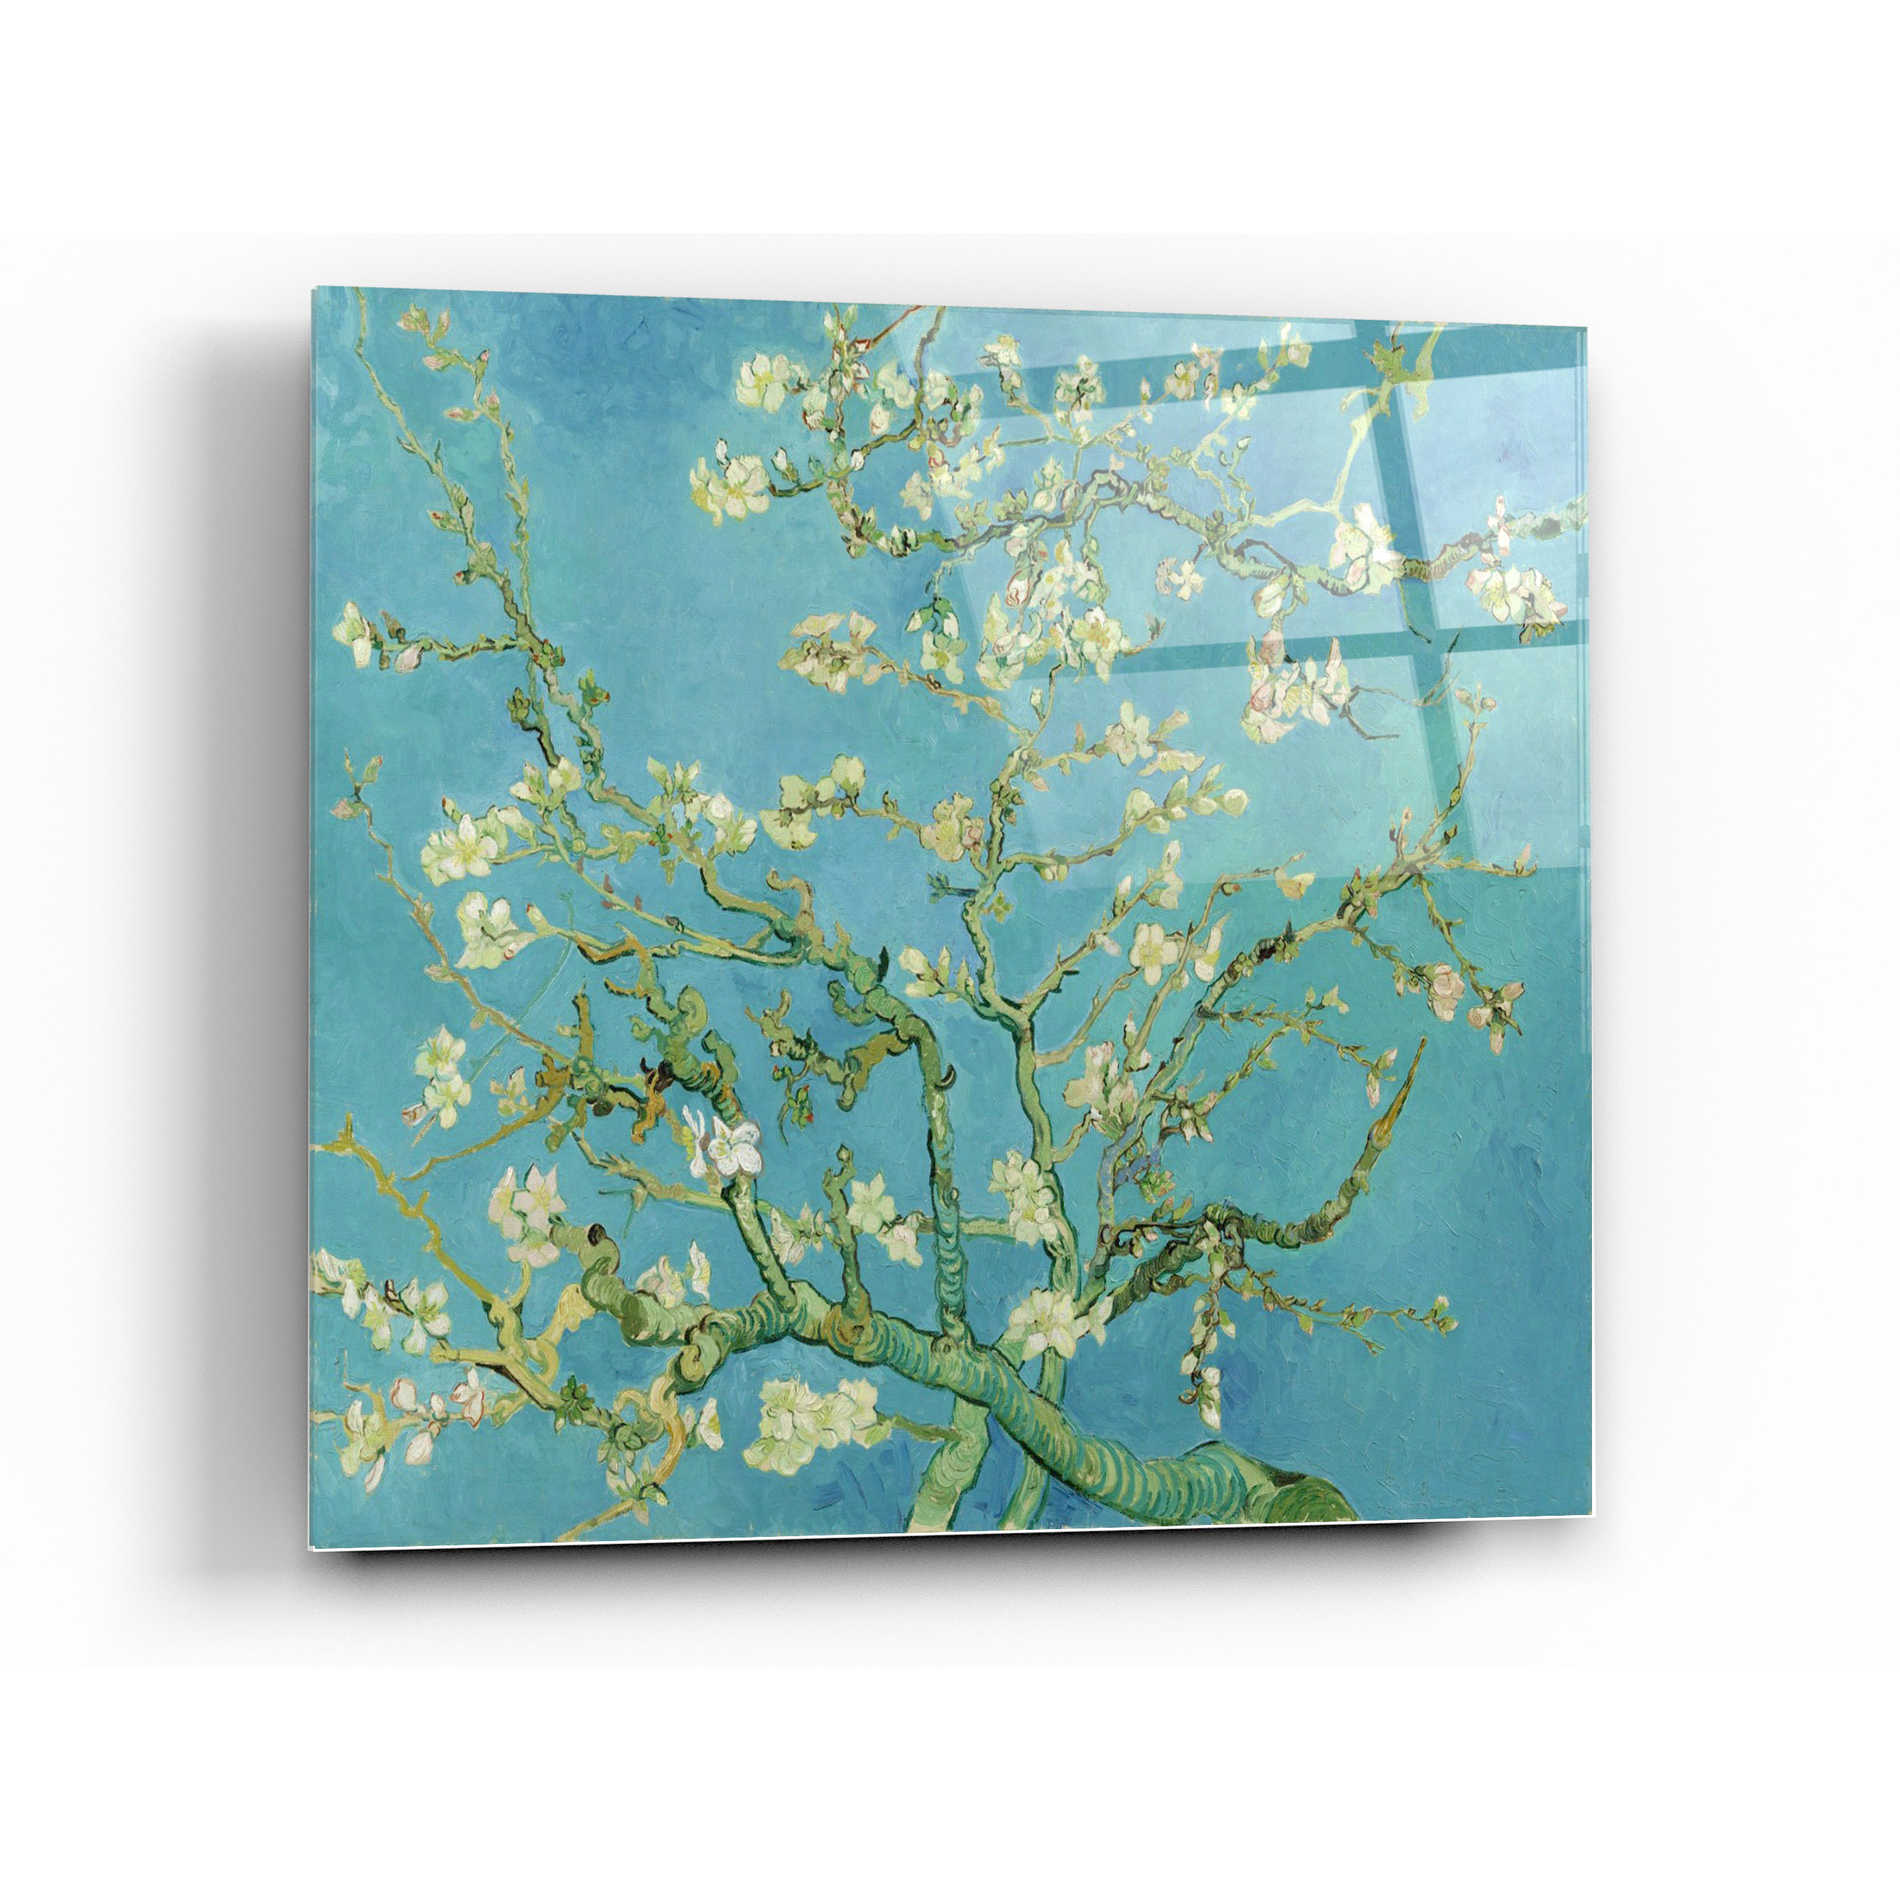 Epic Art 'Almond Blossoms' by Vincent Van Gogh, Acrylic Glass Wall Art,12x12